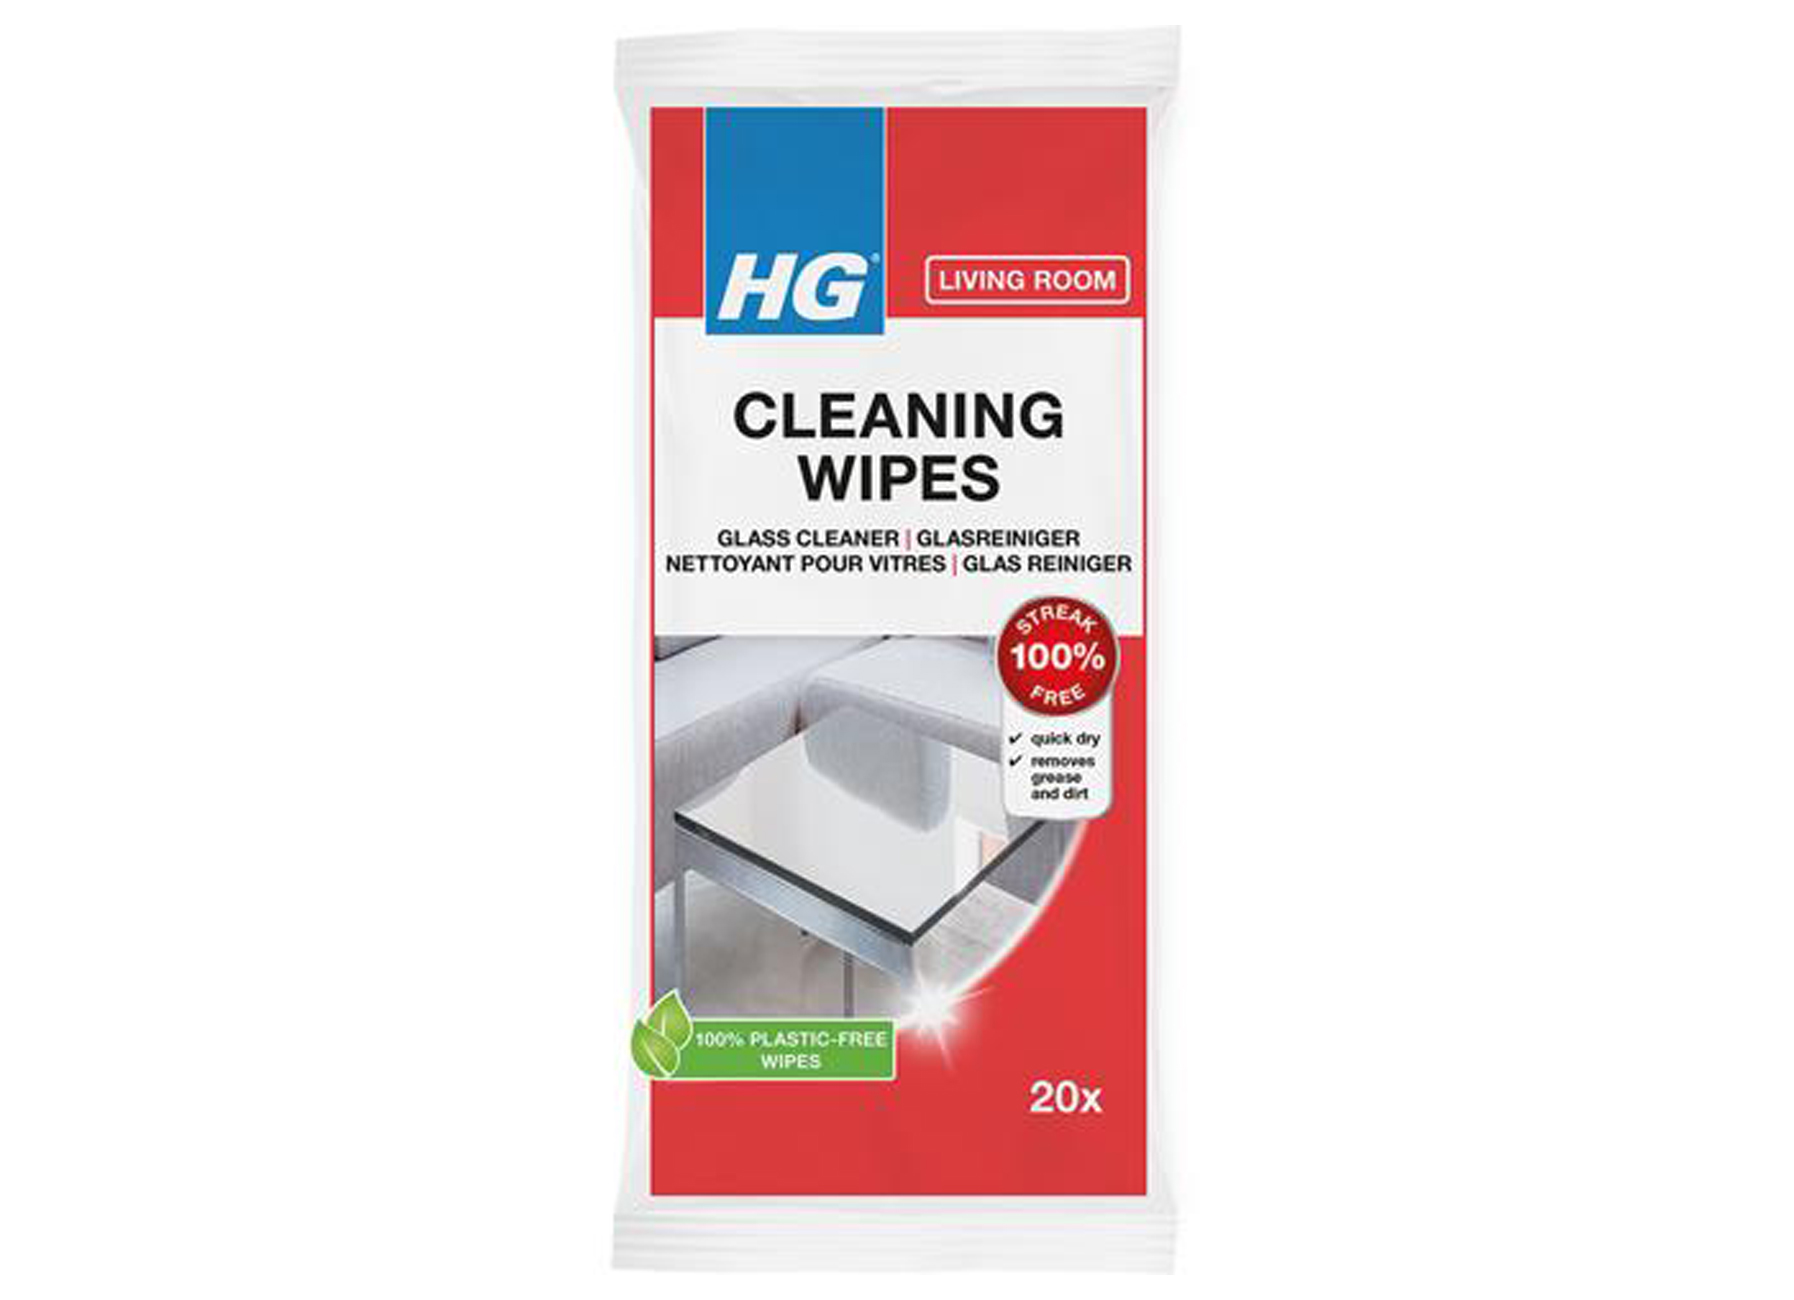 HG CLEANING WIPES GLAS REINIGER 20ST